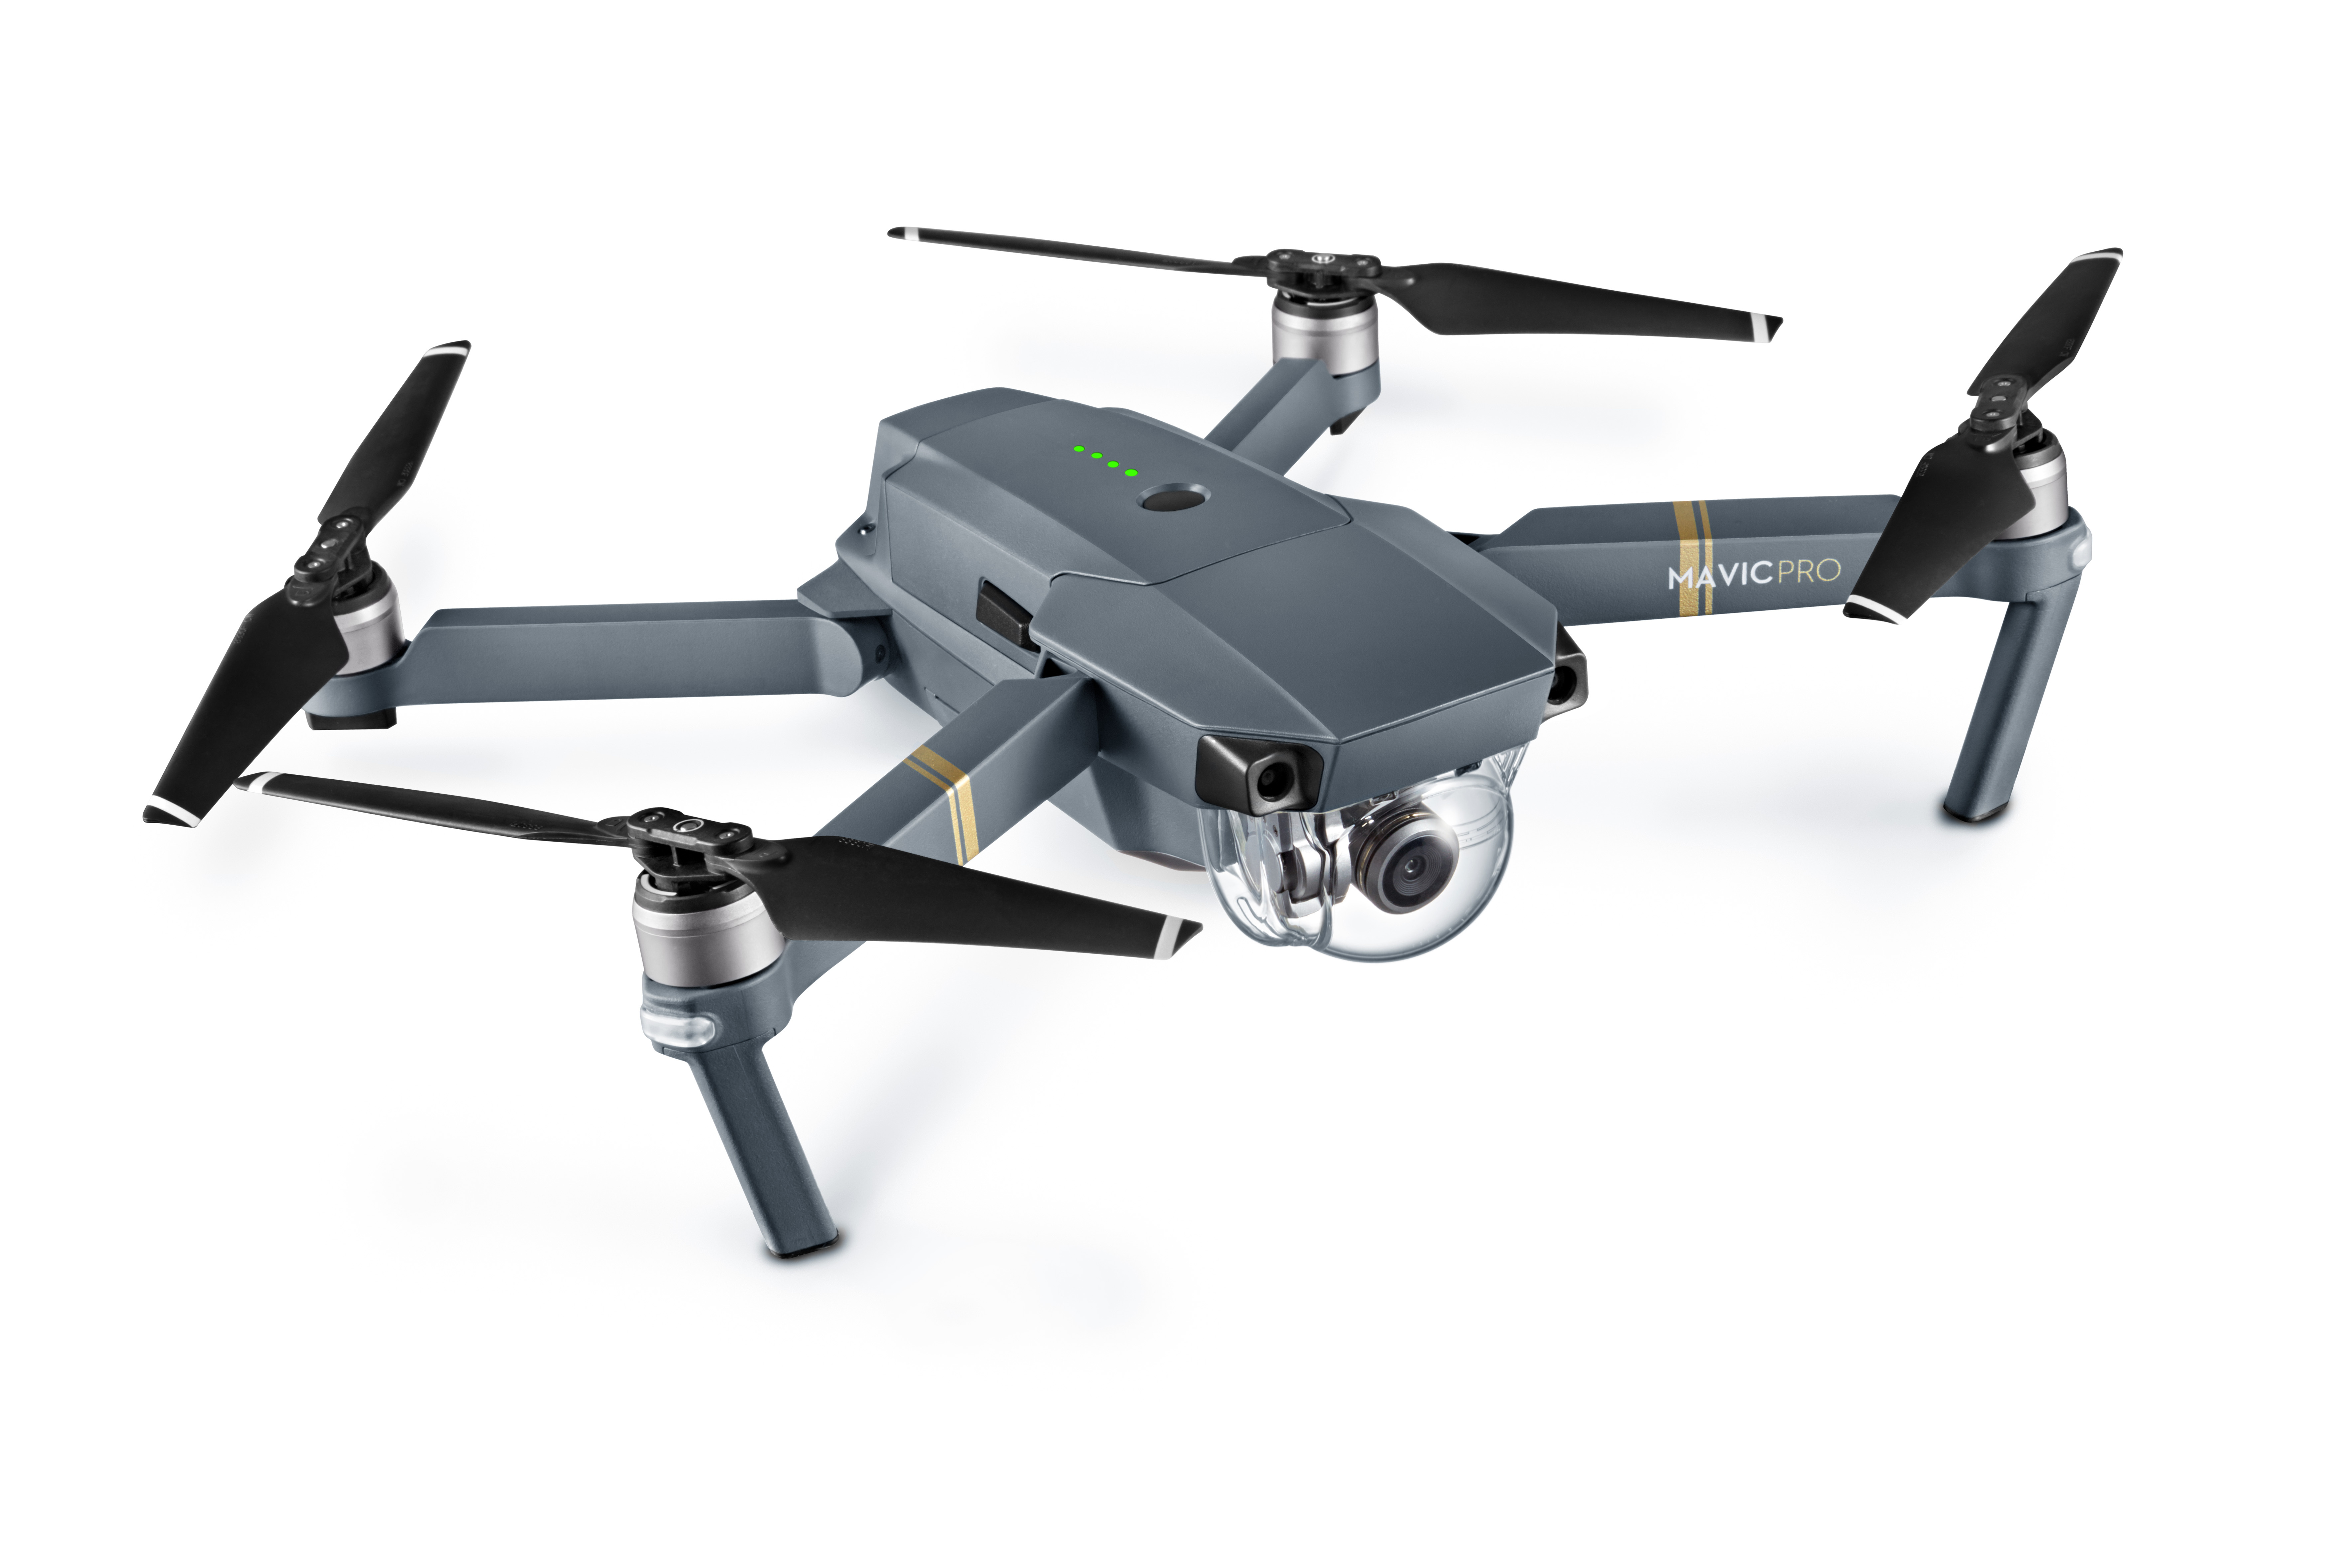 The DJI Autel Lawsuit Will DJI Really Have to Stop Selling Drones in